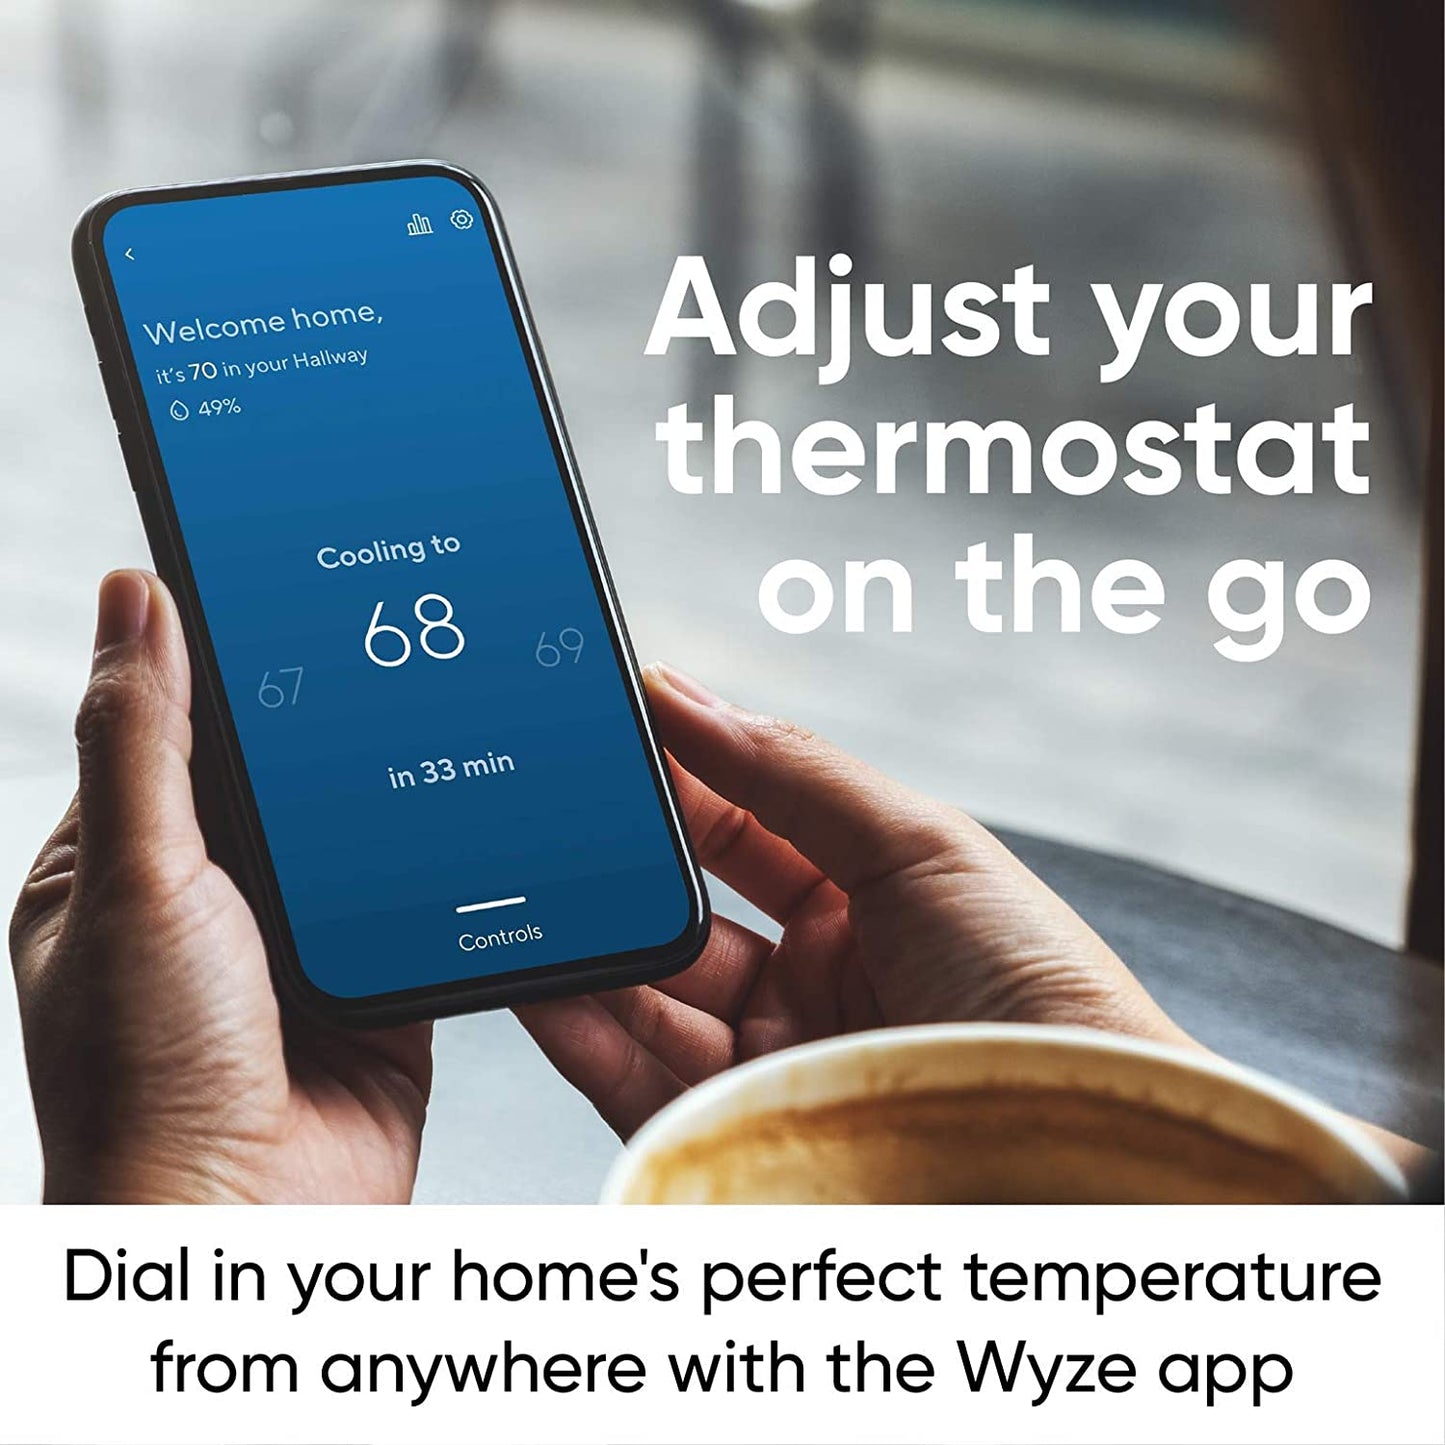 Hands holding a smartphone with the Wyze app open with the Thermostat dashboard open. White text overlay that says "Adjust your thermostat on the go."